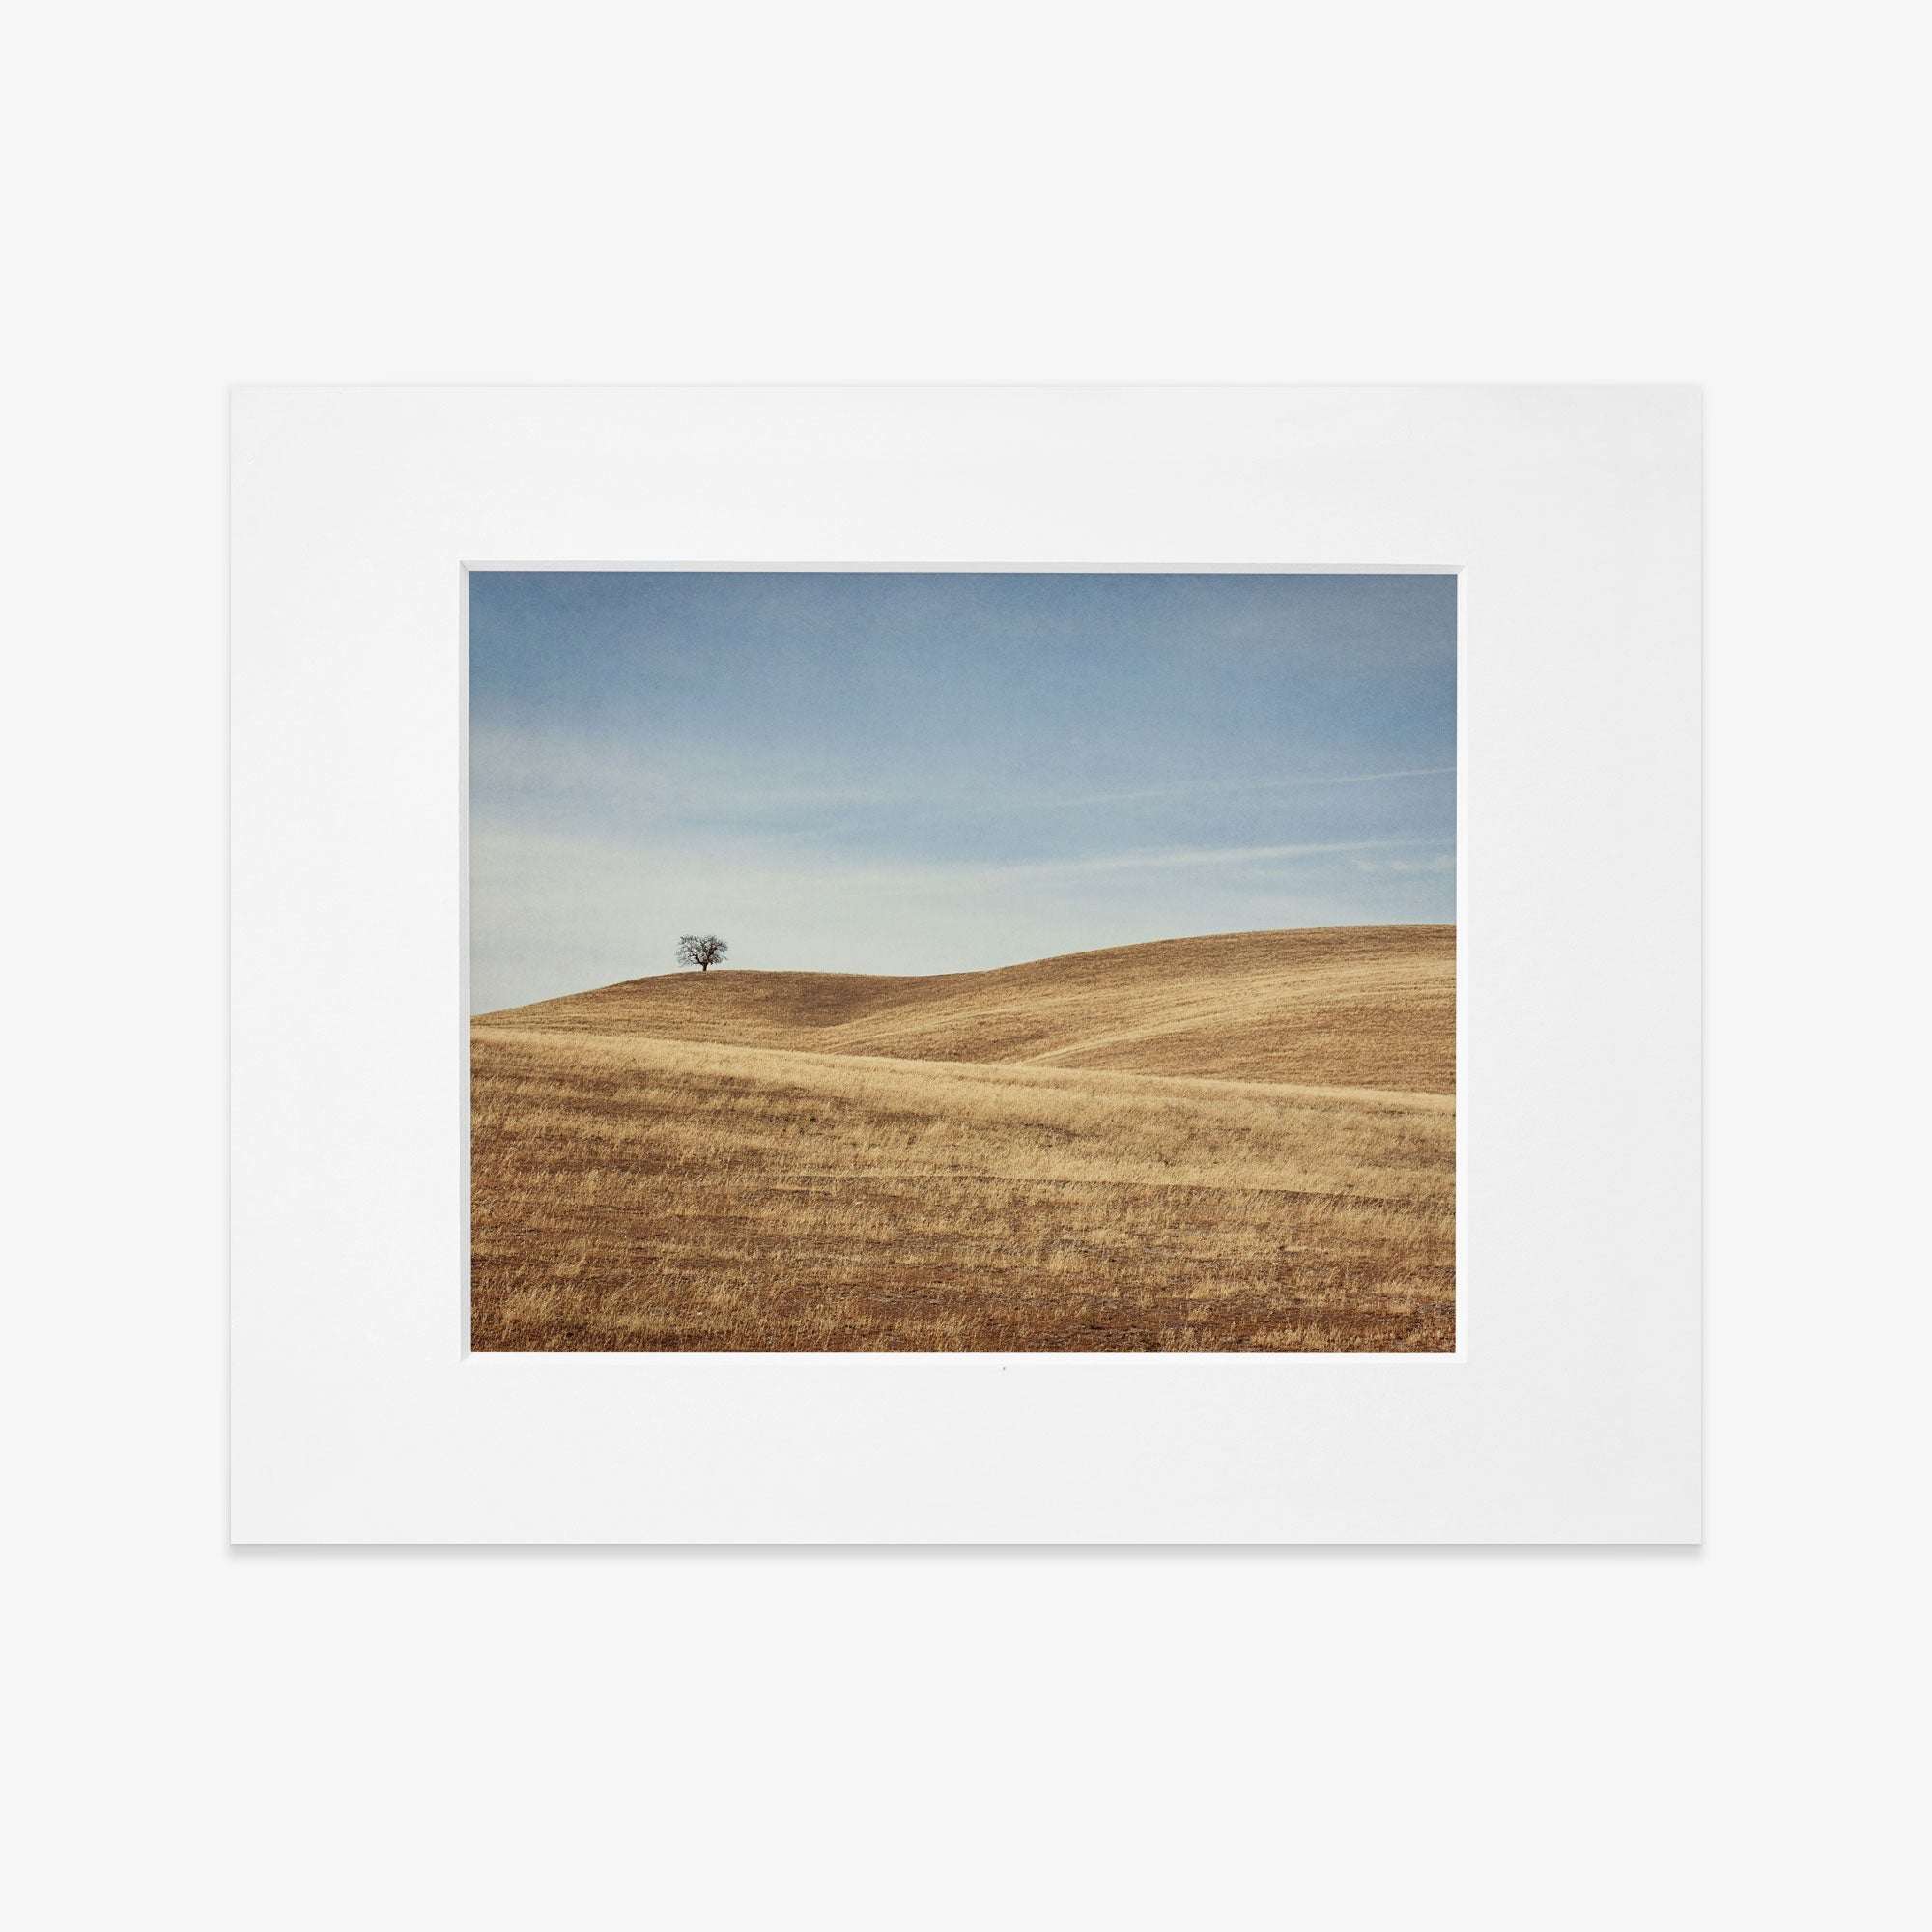 A framed photograph depicting a solitary tree atop a gently rolling hill covered with golden brown grass in the Santa Ynez Valley under a clear blue sky. Offley Green&#39;s California Central Coast Landscape Print &#39;Golden Ynez&#39; captures this breathtaking scene beautifully.